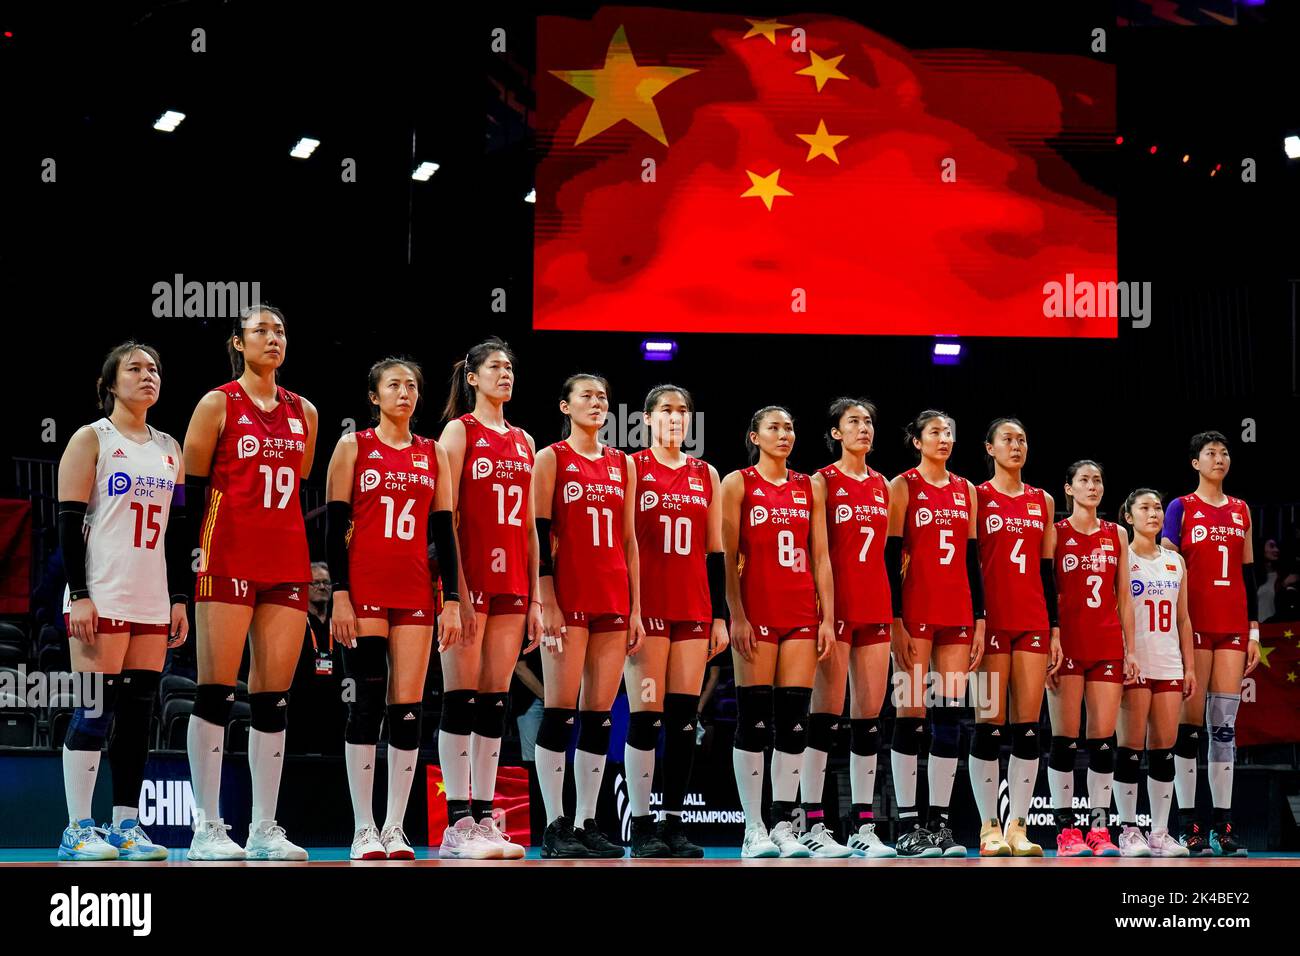 ARNHEM, NETHERLANDS - SEPTEMBER 25: Weiyi Wang of China, Peiyan Chen of China, Xia Ding of China, Yingying Li of China, Yizhu Wang of China, Yunlu Wang of China, Ye Jin of China, Yuanyuan Wang of China, Yi Gao of China, Hanyu Yang of China, Linyu Diao of China, Mengjie Wang of China and Xinyue Yuan of China line up for the national anthem during the Pool D Phase 1 match between China and Argentina on Day 3 of the FIVB Volleyball Womens World Championship 2022 at the Gelredome on September 25, 2022 in Arnhem, Netherlands (Photo by Rene Nijhuis/Orange Pictures) Stock Photo